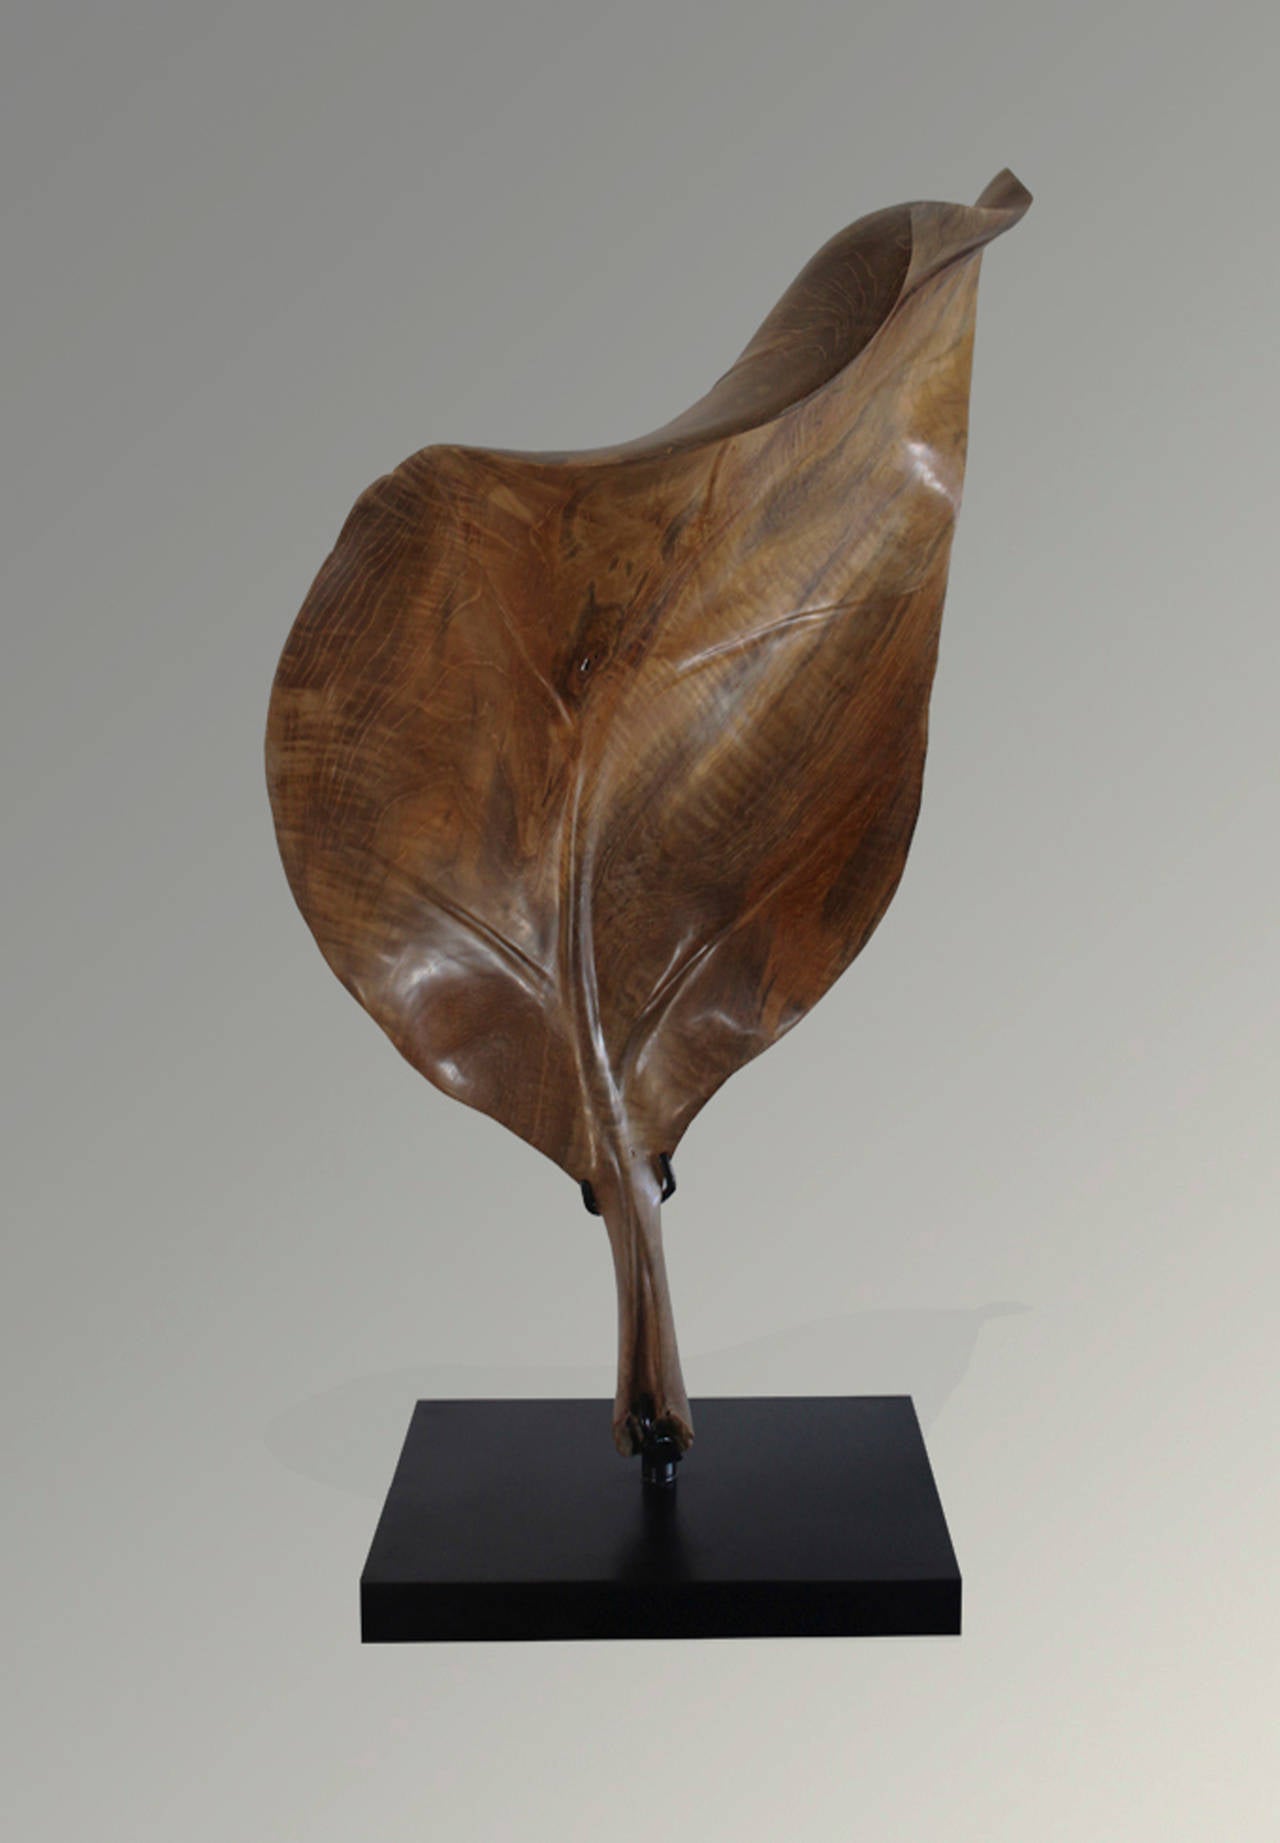 Beautifully hand-carved palm leaf sculpture made from one-piece of reclaimed teak wood. Dramatic yet understated, this piece is set on a modern black stand.

Measure: 10